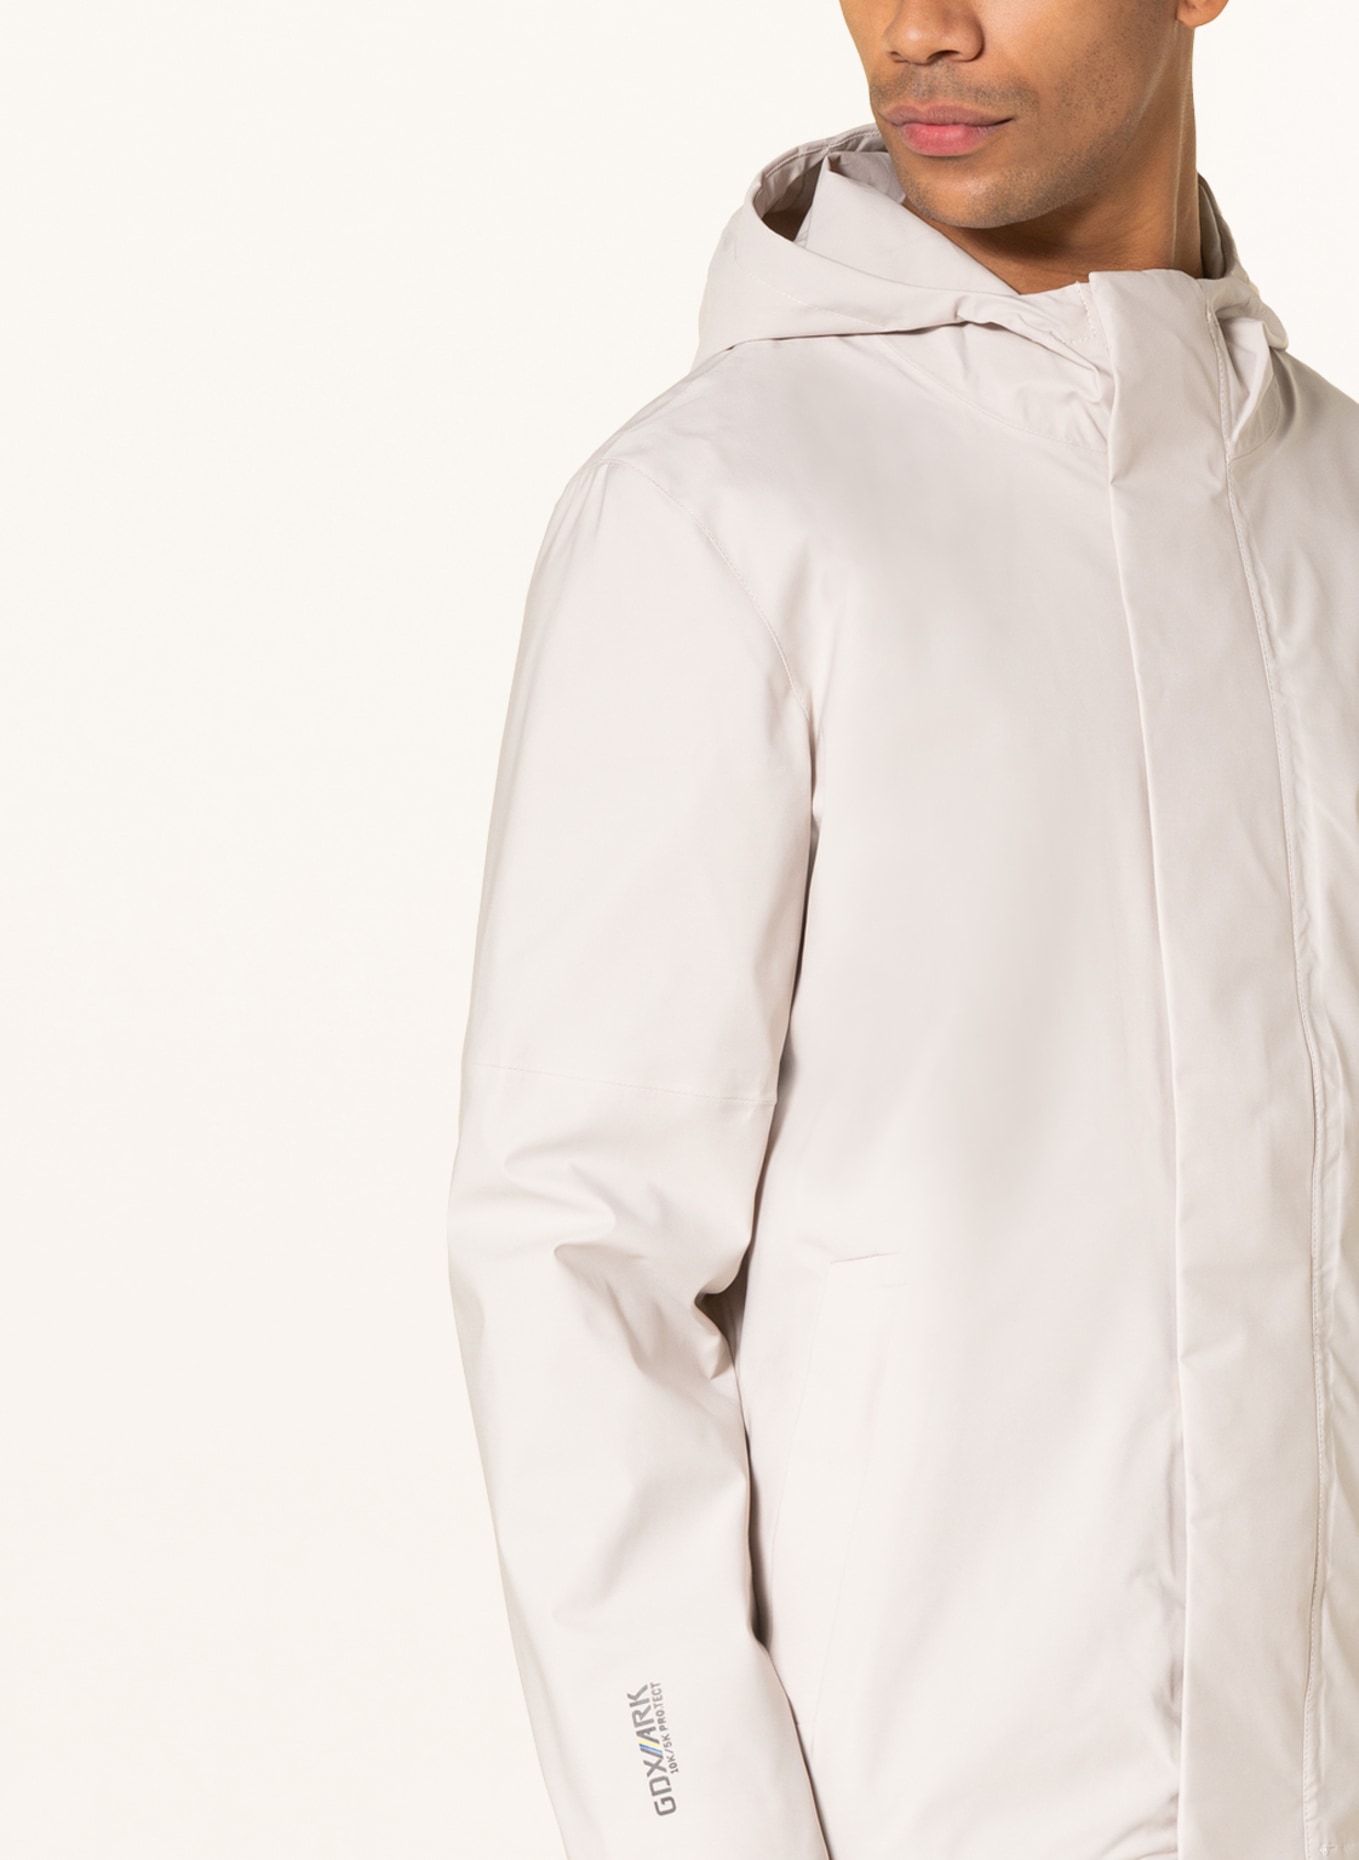 by G.I.G.A. 147 killtec cream GS jacket DX in Outdoor